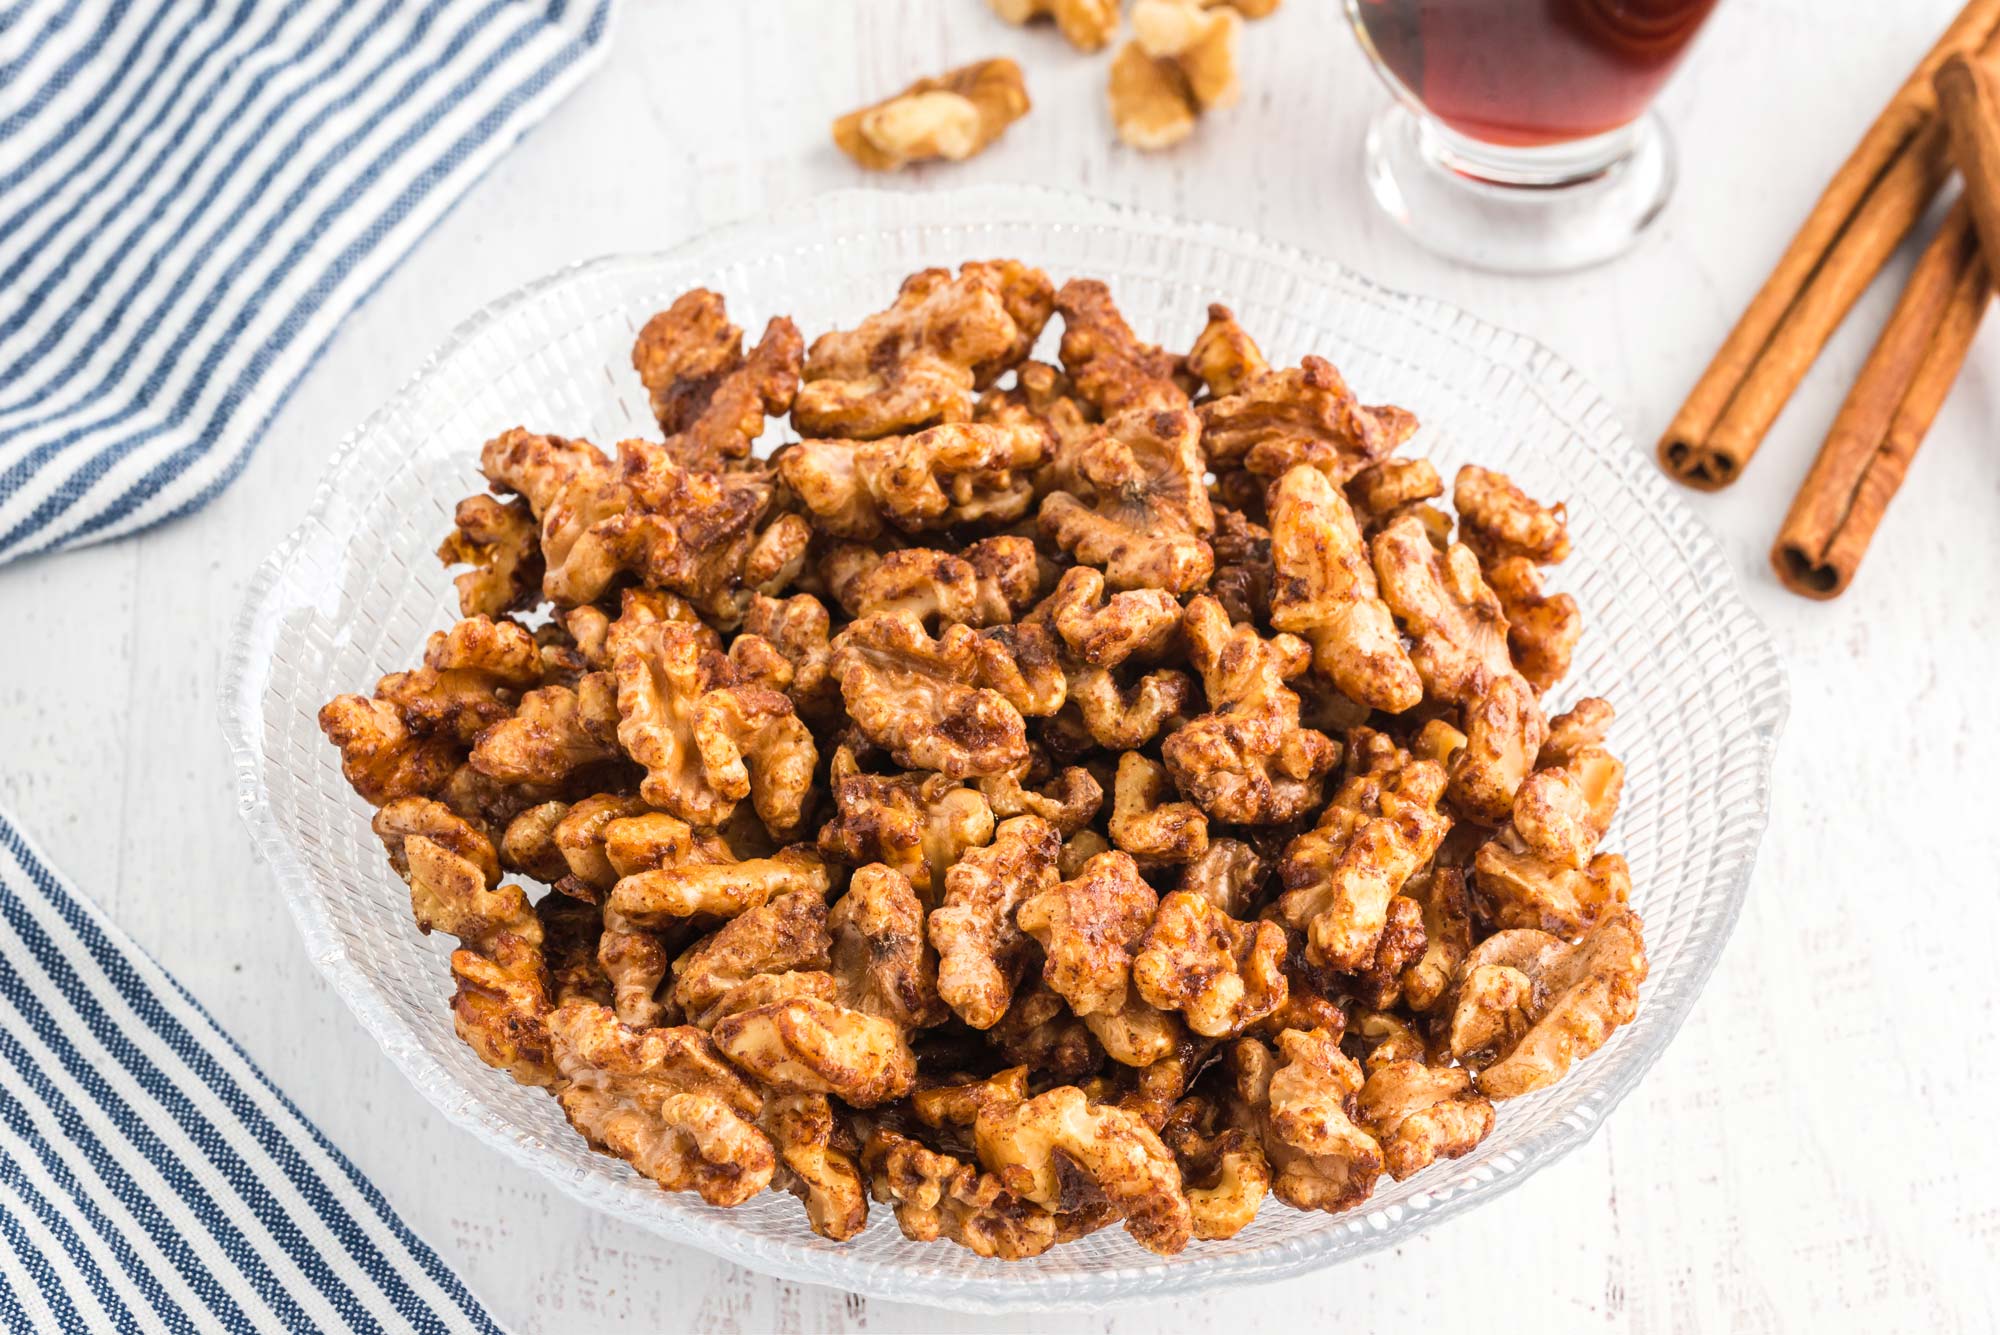 Crunchy Candied Walnuts - health benefits of nuts